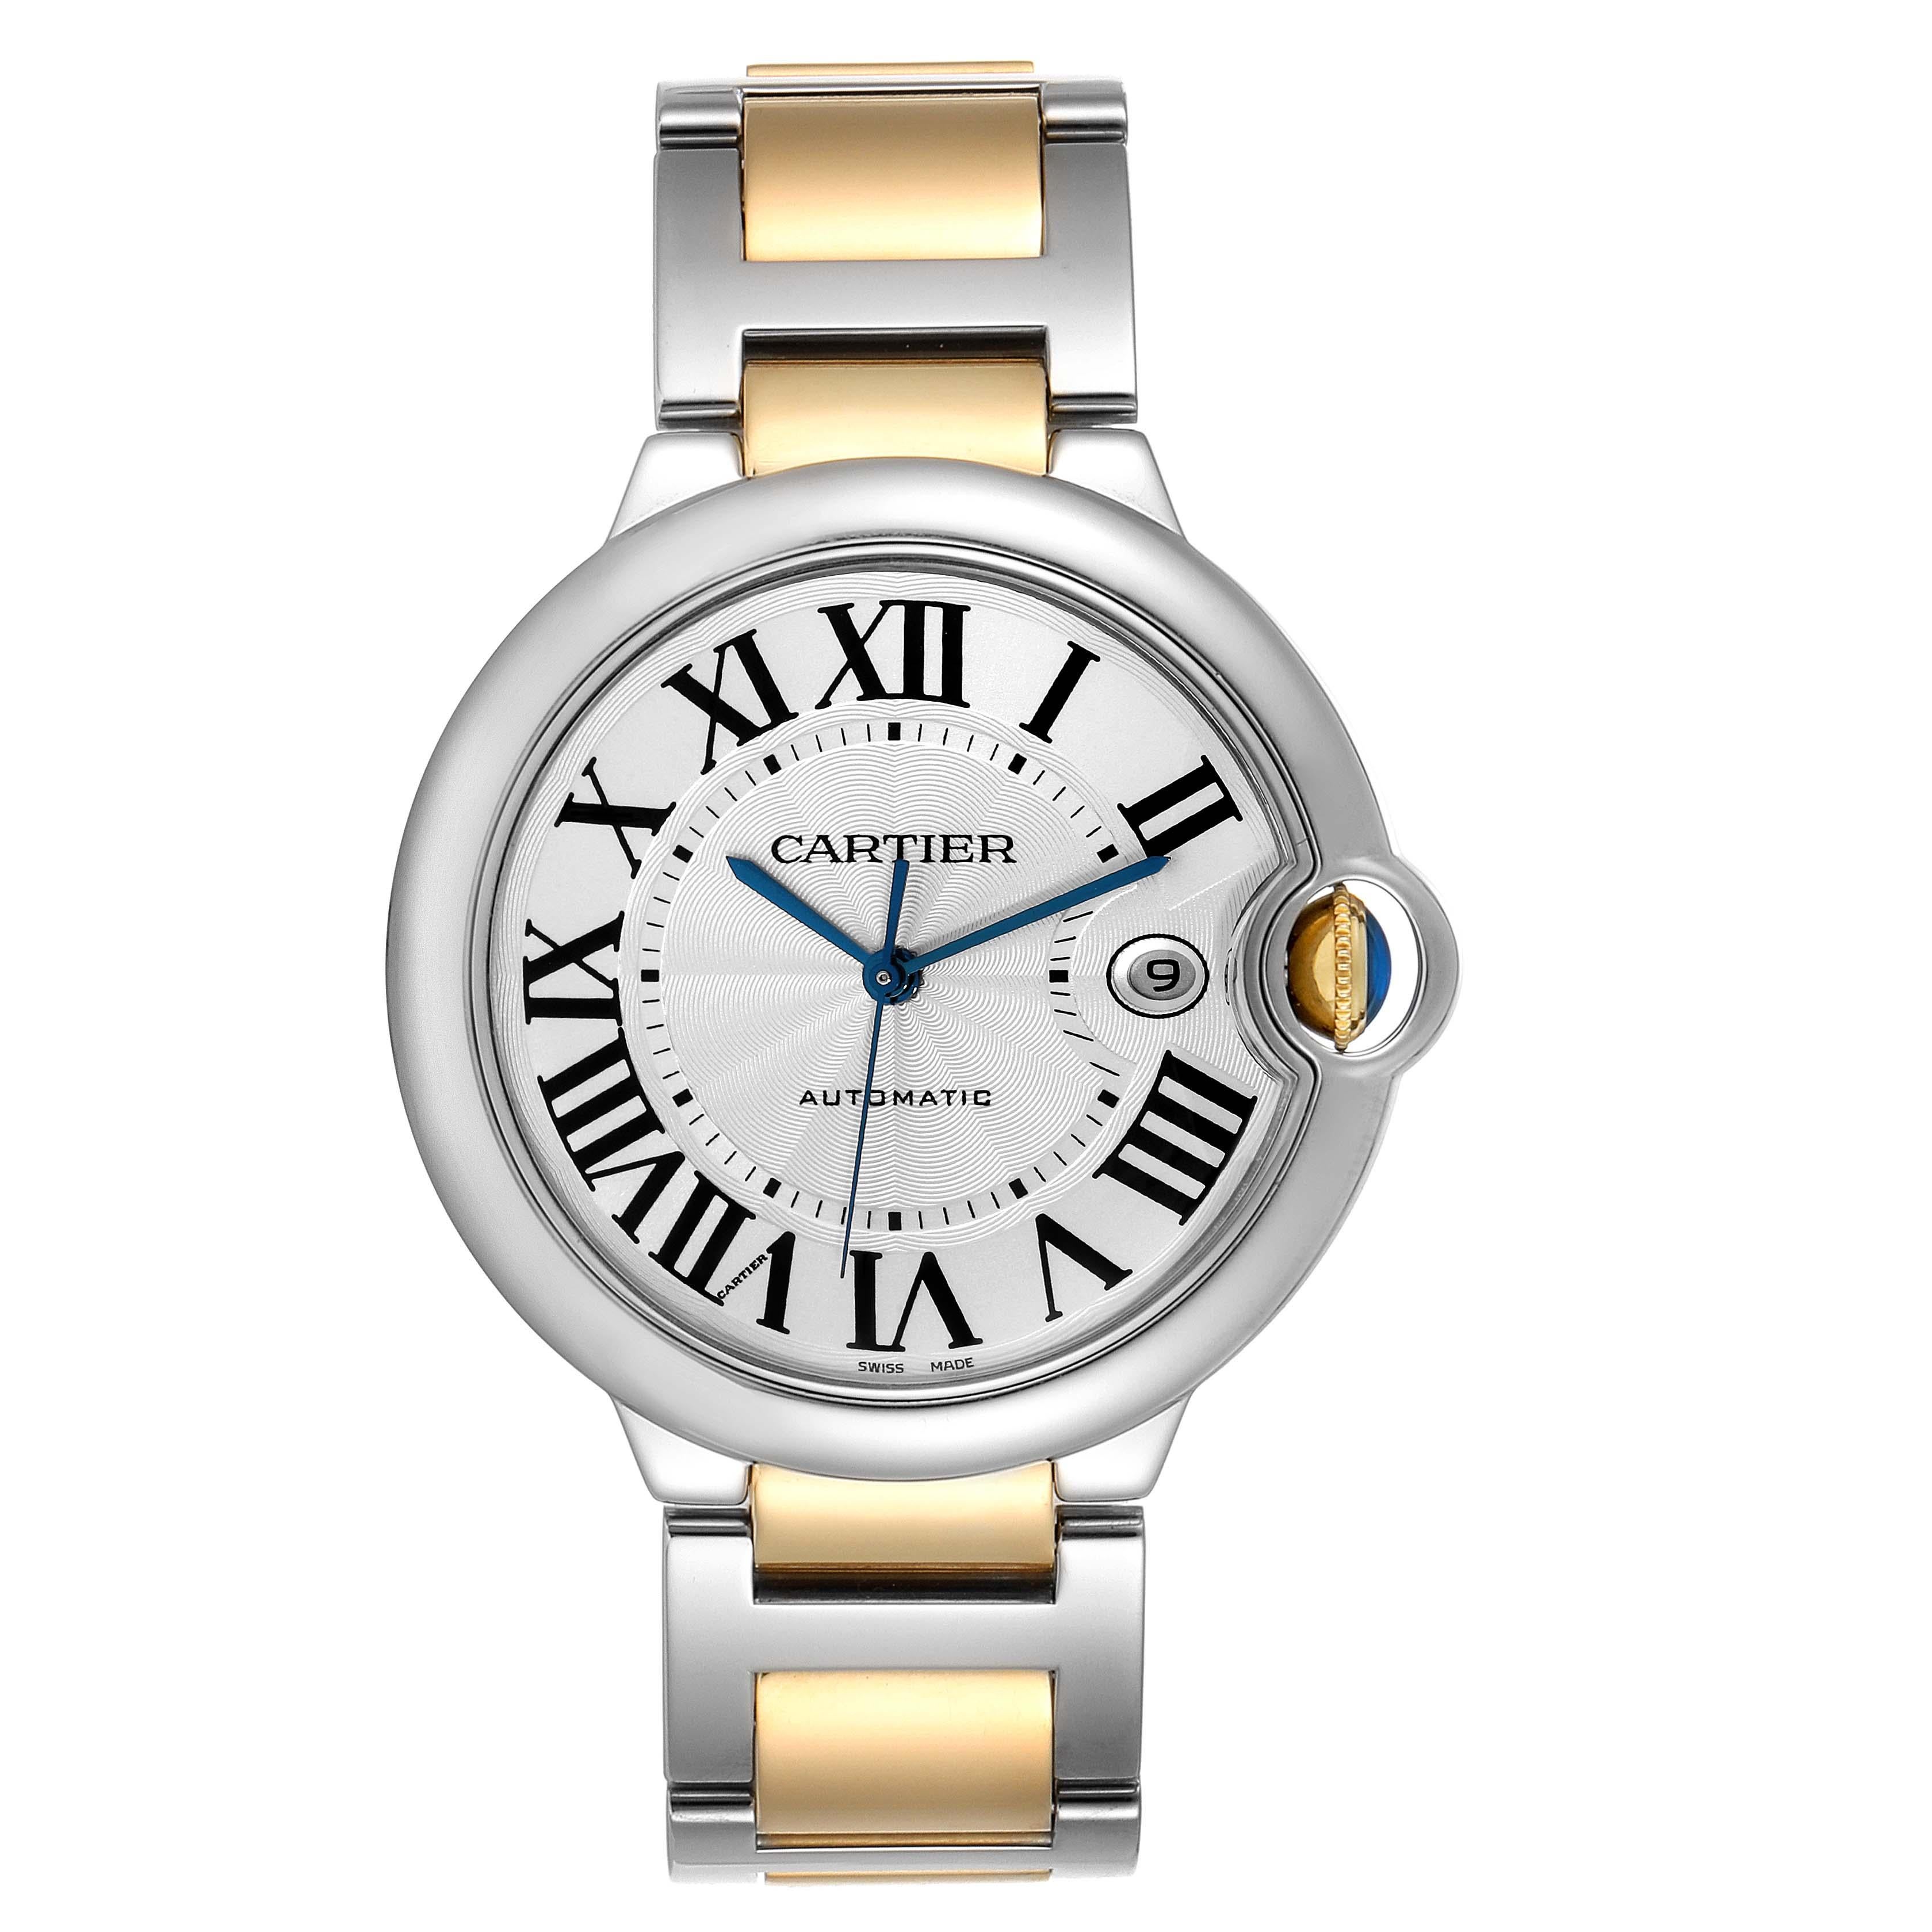 Cartier Ballon Bleu Silver Dial Steel Yellow Gold Mens Watch W69009Z3. Automatic self-winding movement. Round stainless steel case 42.1 mm in diameter, 13 mm thick. Fluted 18k crown set with the blue spinel cabochon. Stainless steel smooth bezel.